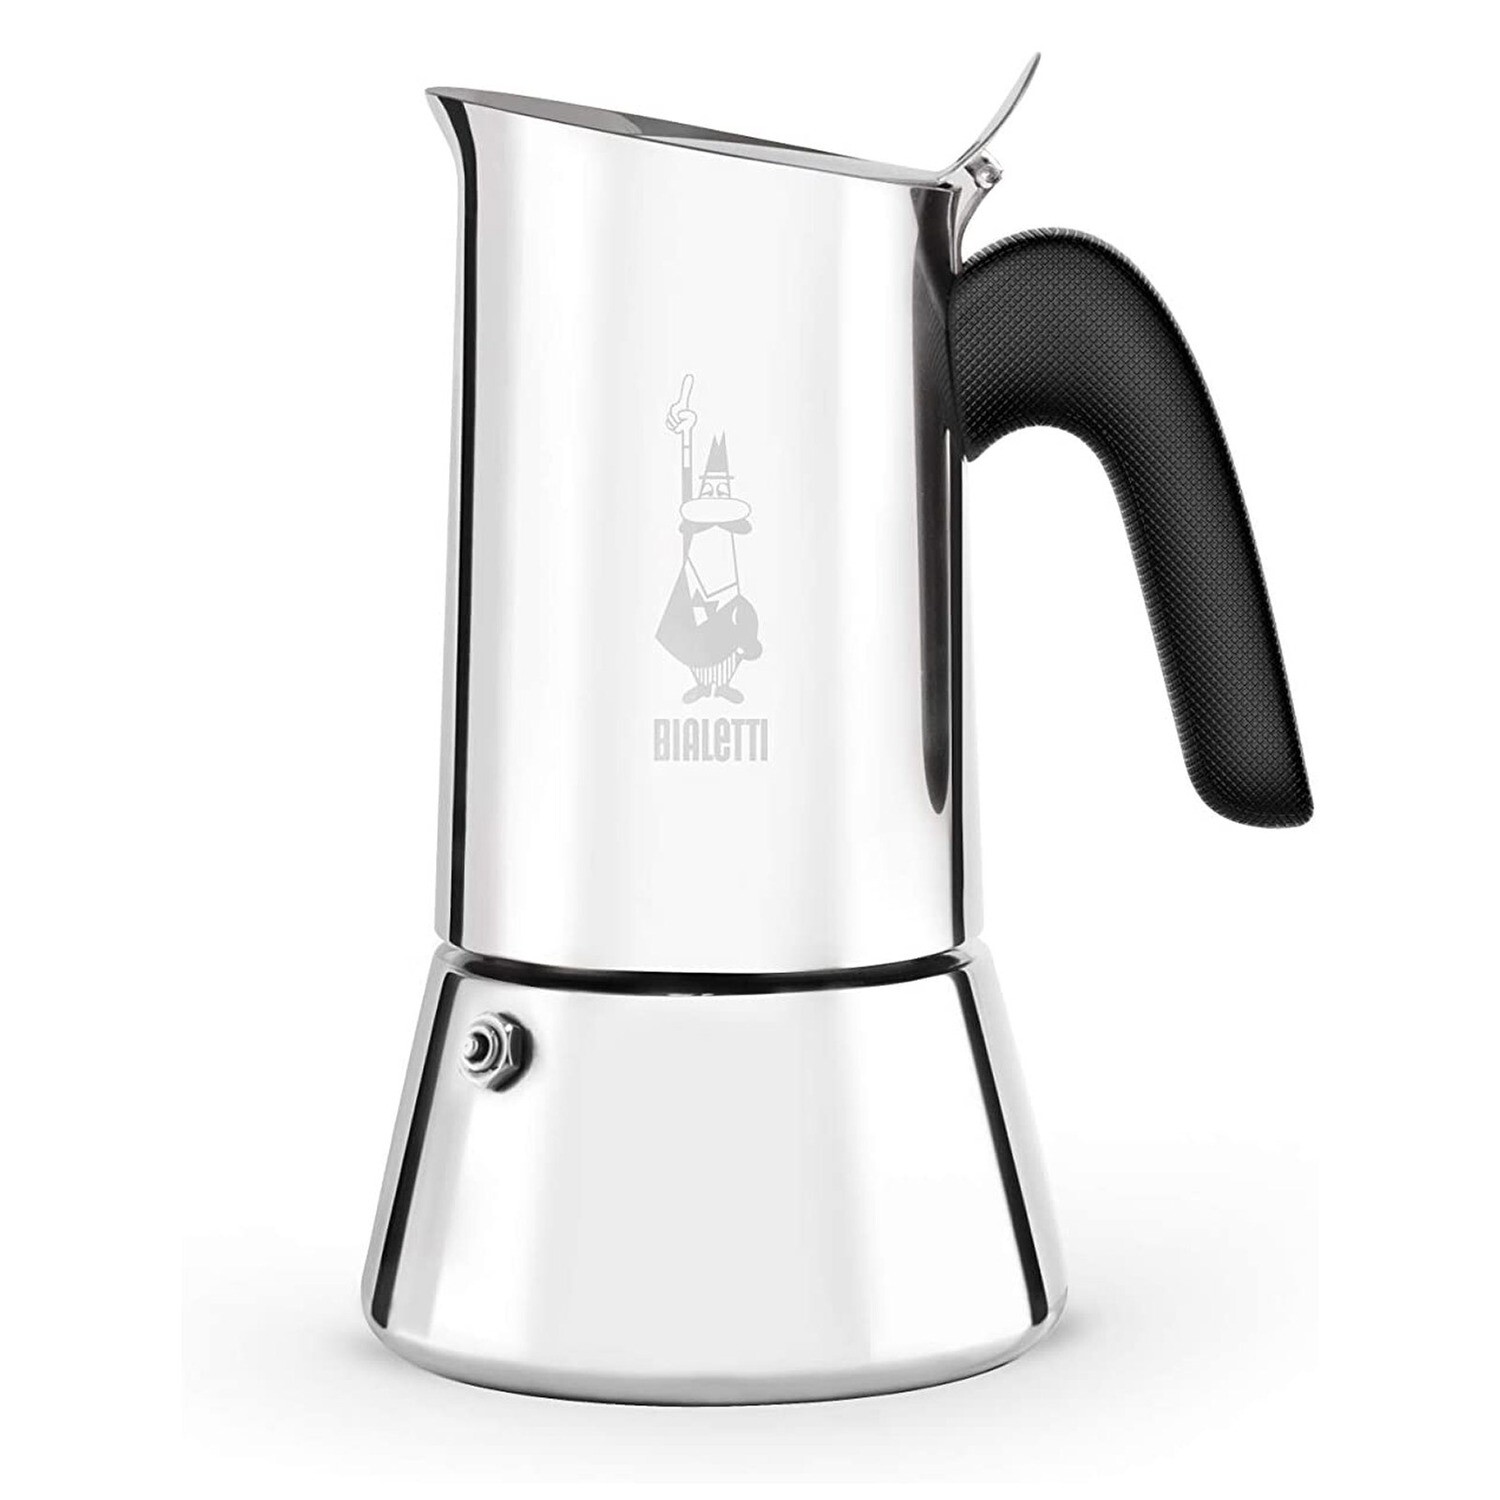 BIALETTI- Venus Stainless Steel Induction Espresso Maker 2 Cup